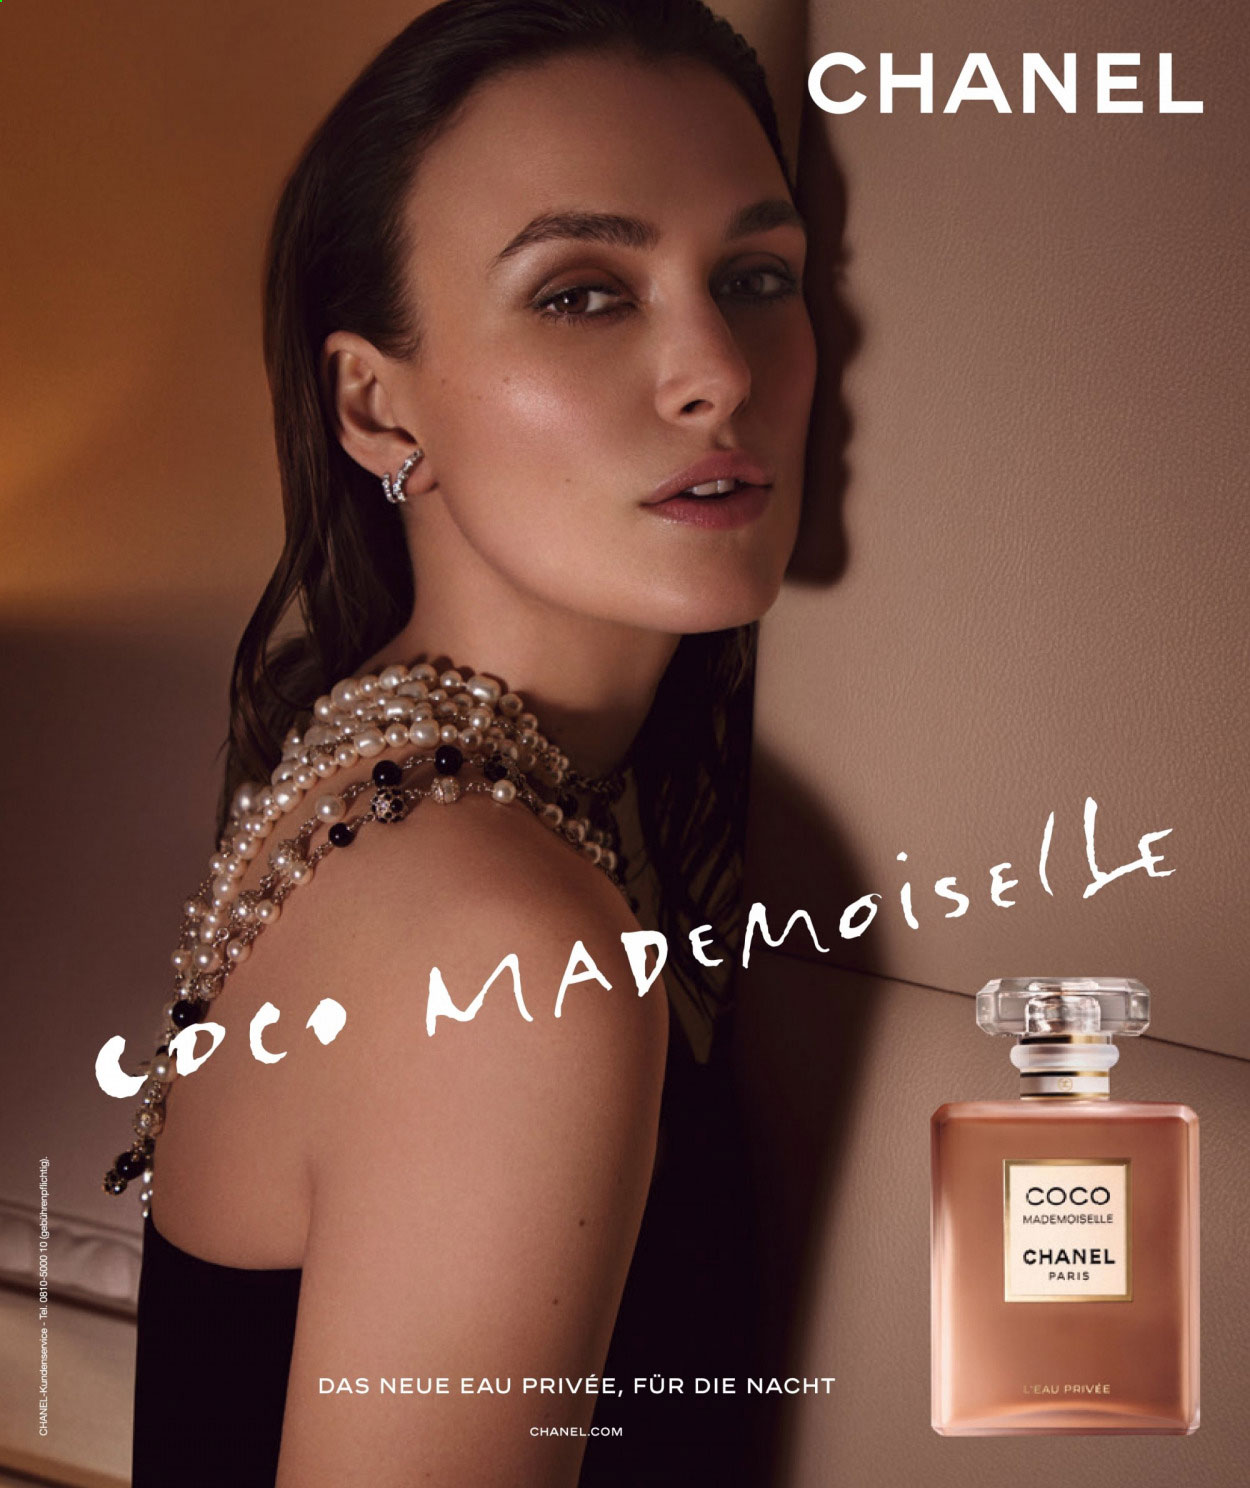 Chanel Coco Mademoiselle L'Eau Privee new floriental perfume guide to